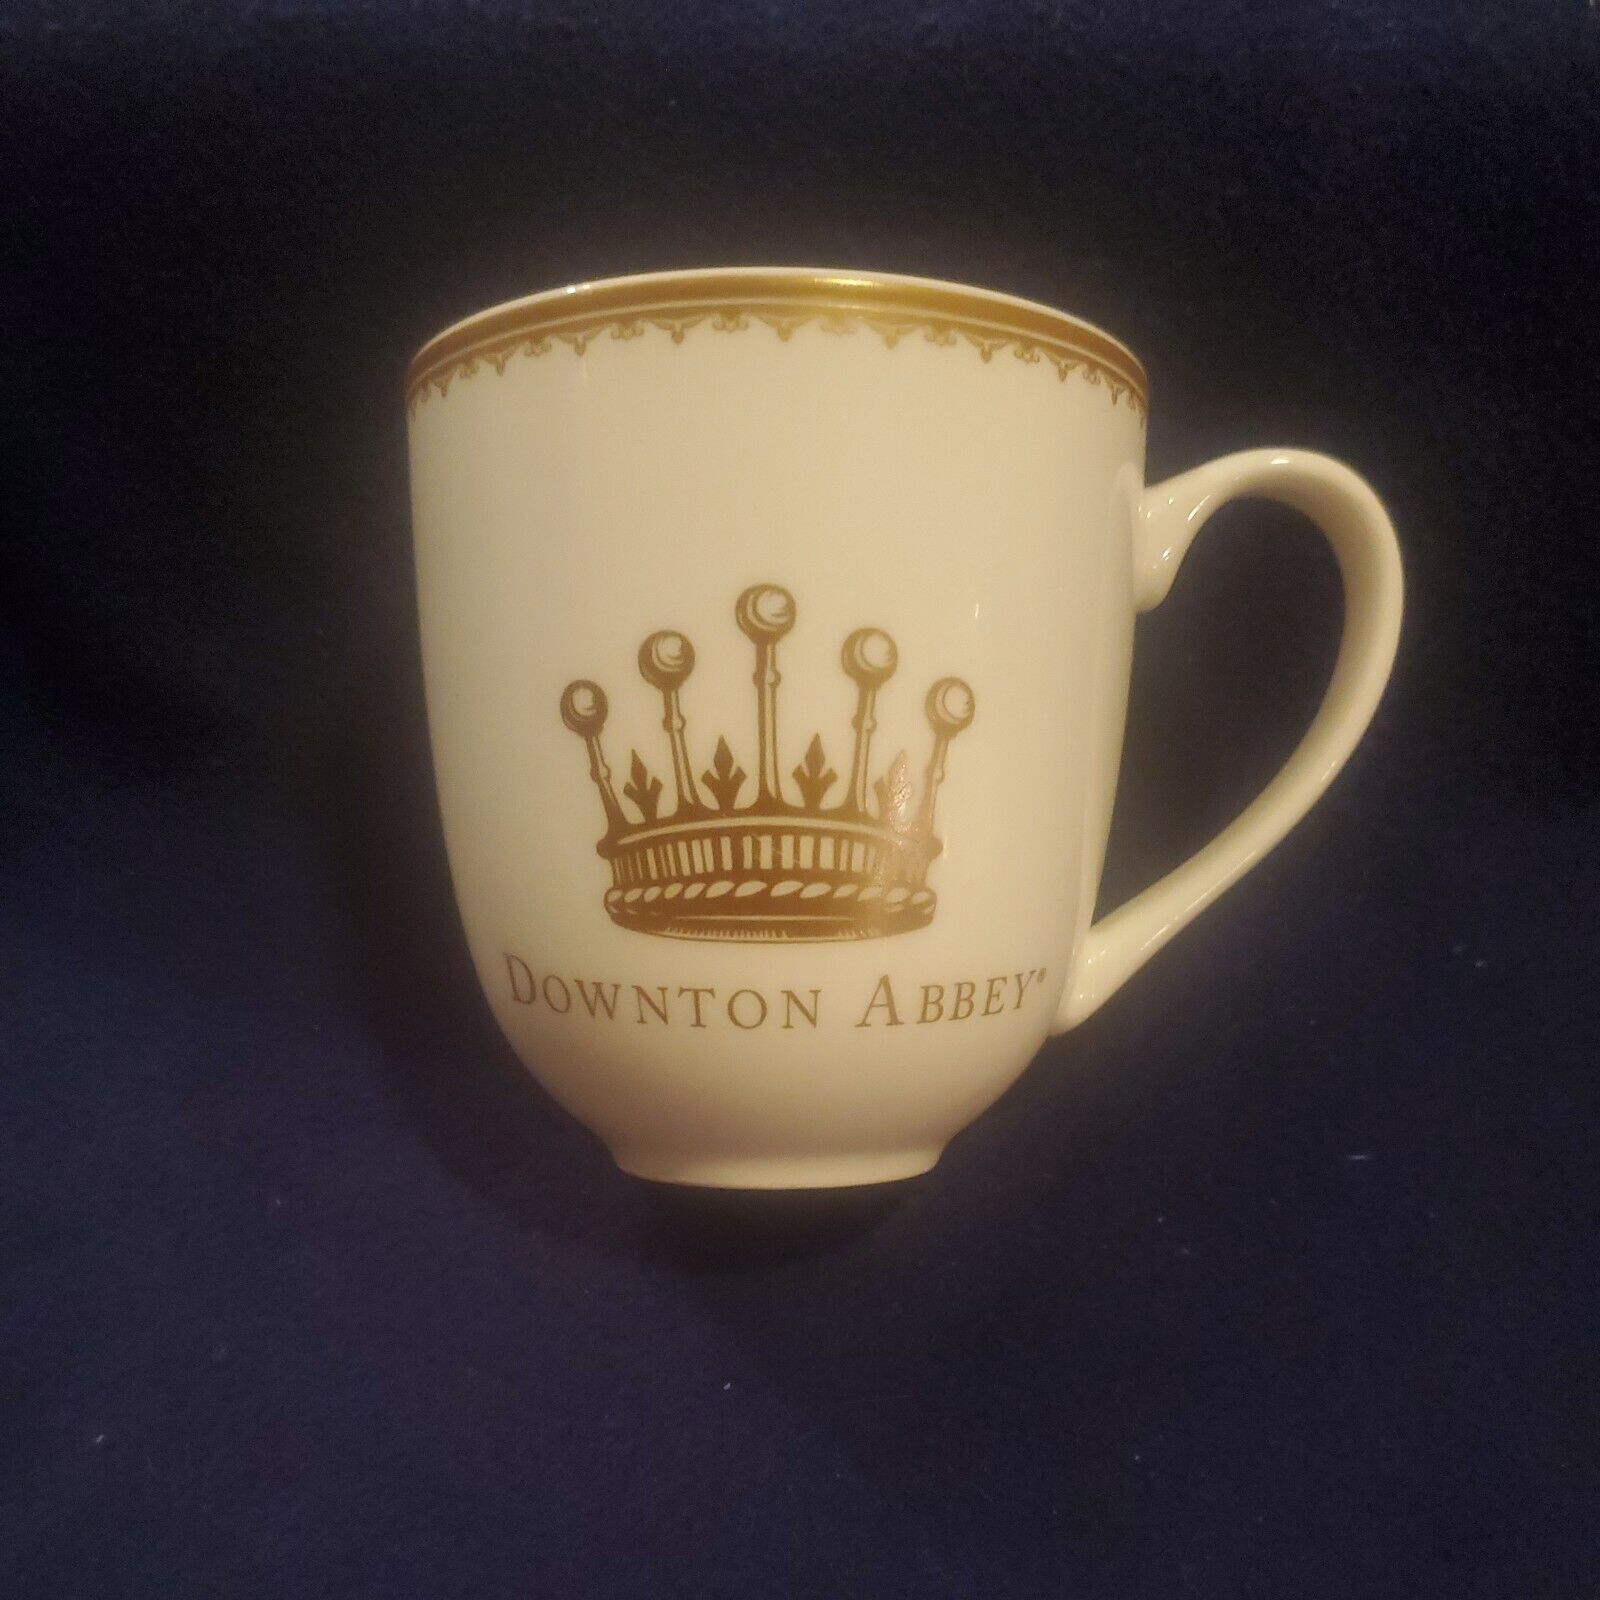 Sale item World Market 2014 Downton Abbey Mug Black Outstanding Coffee Giveaway Friday